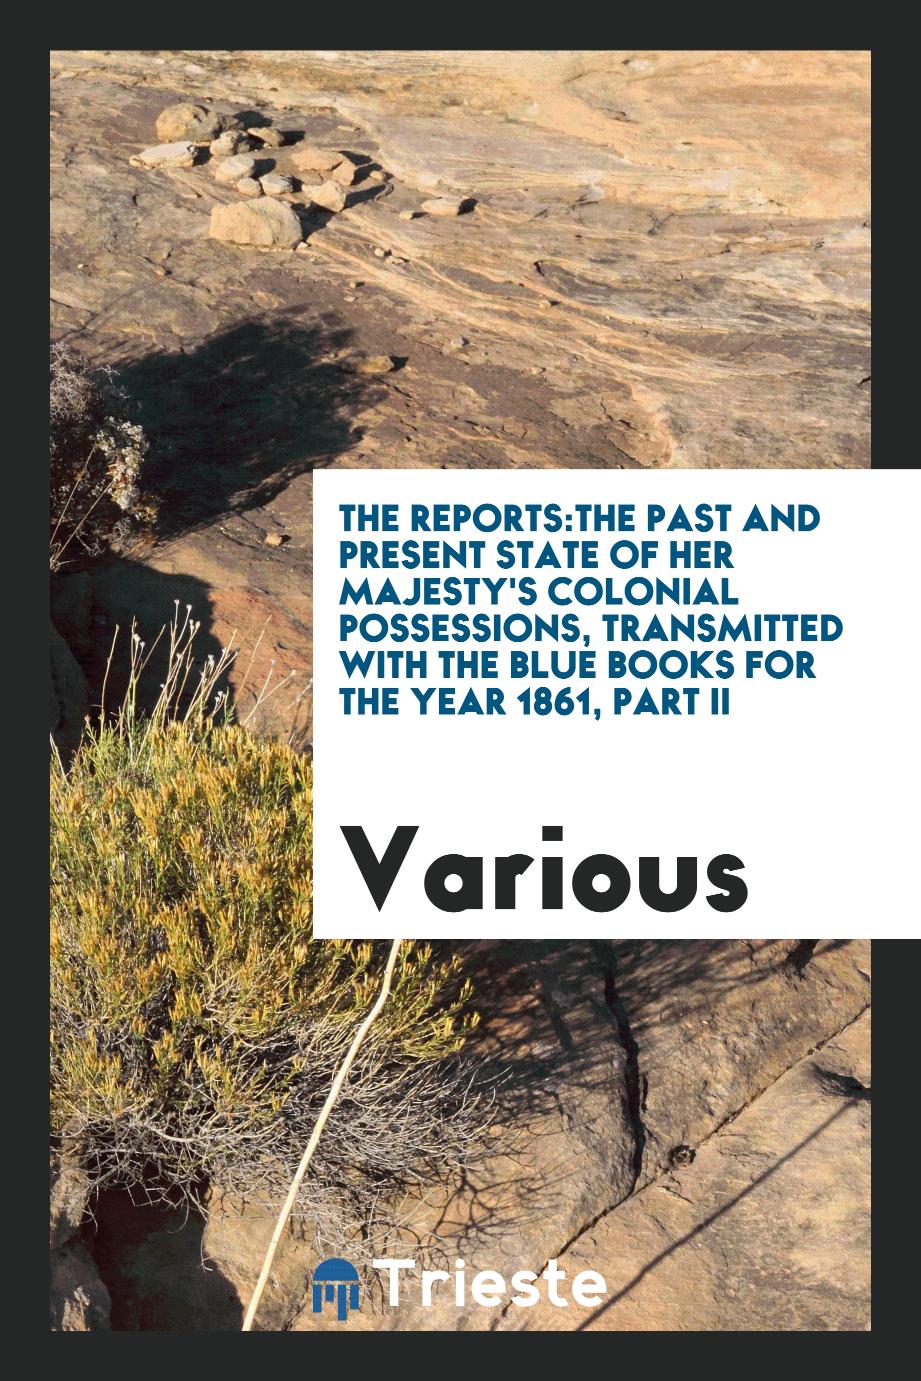 The Reports:The Past and Present State of Her Majesty's Colonial Possessions, Transmitted with the Blue Books for the Year 1861, Part II